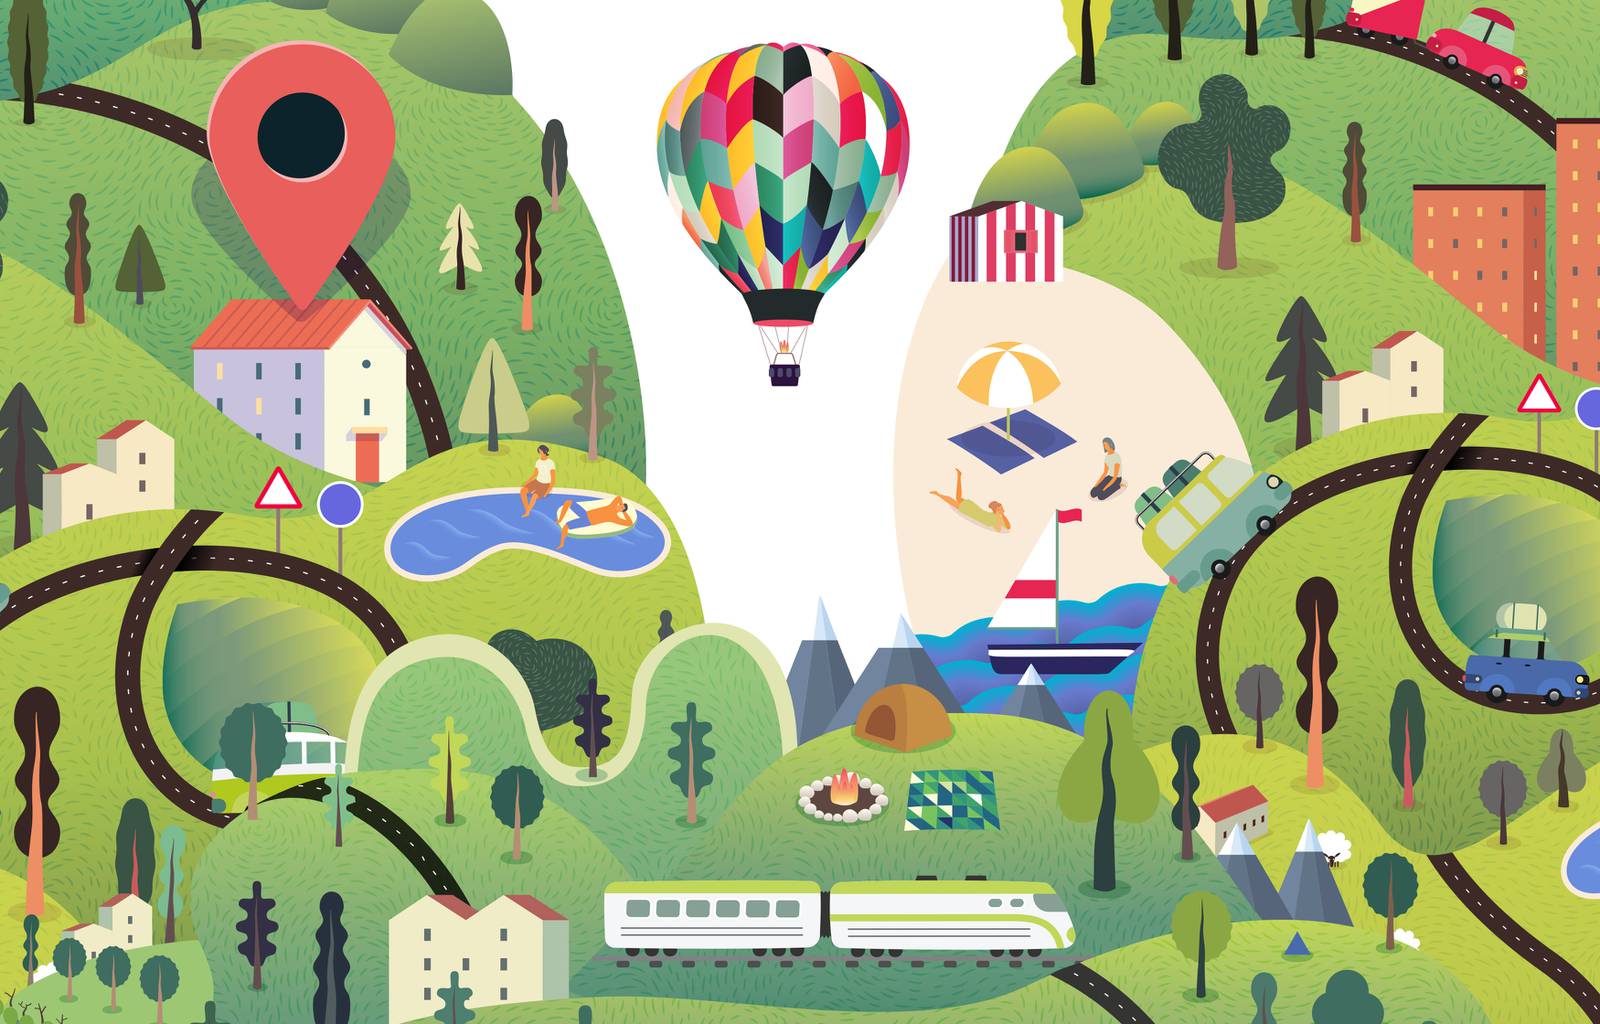 Irish Times Best Place to Holiday in Ireland competition. Illustration: Ross Coghlan